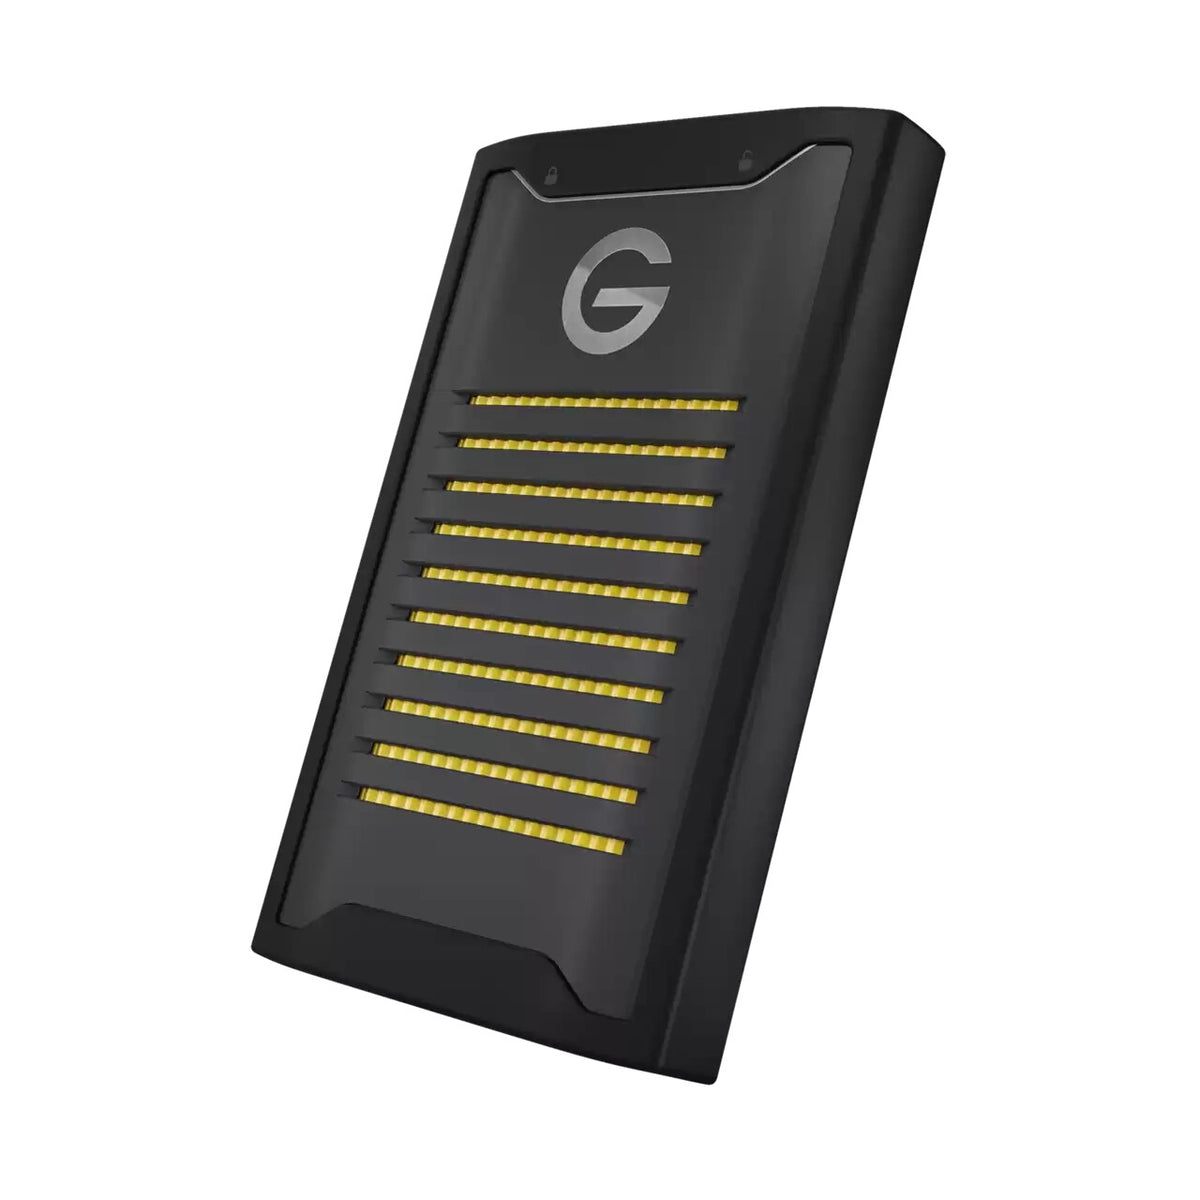 SanDisk G-DRIVE ArmorLock with Password Protection - 2 TB